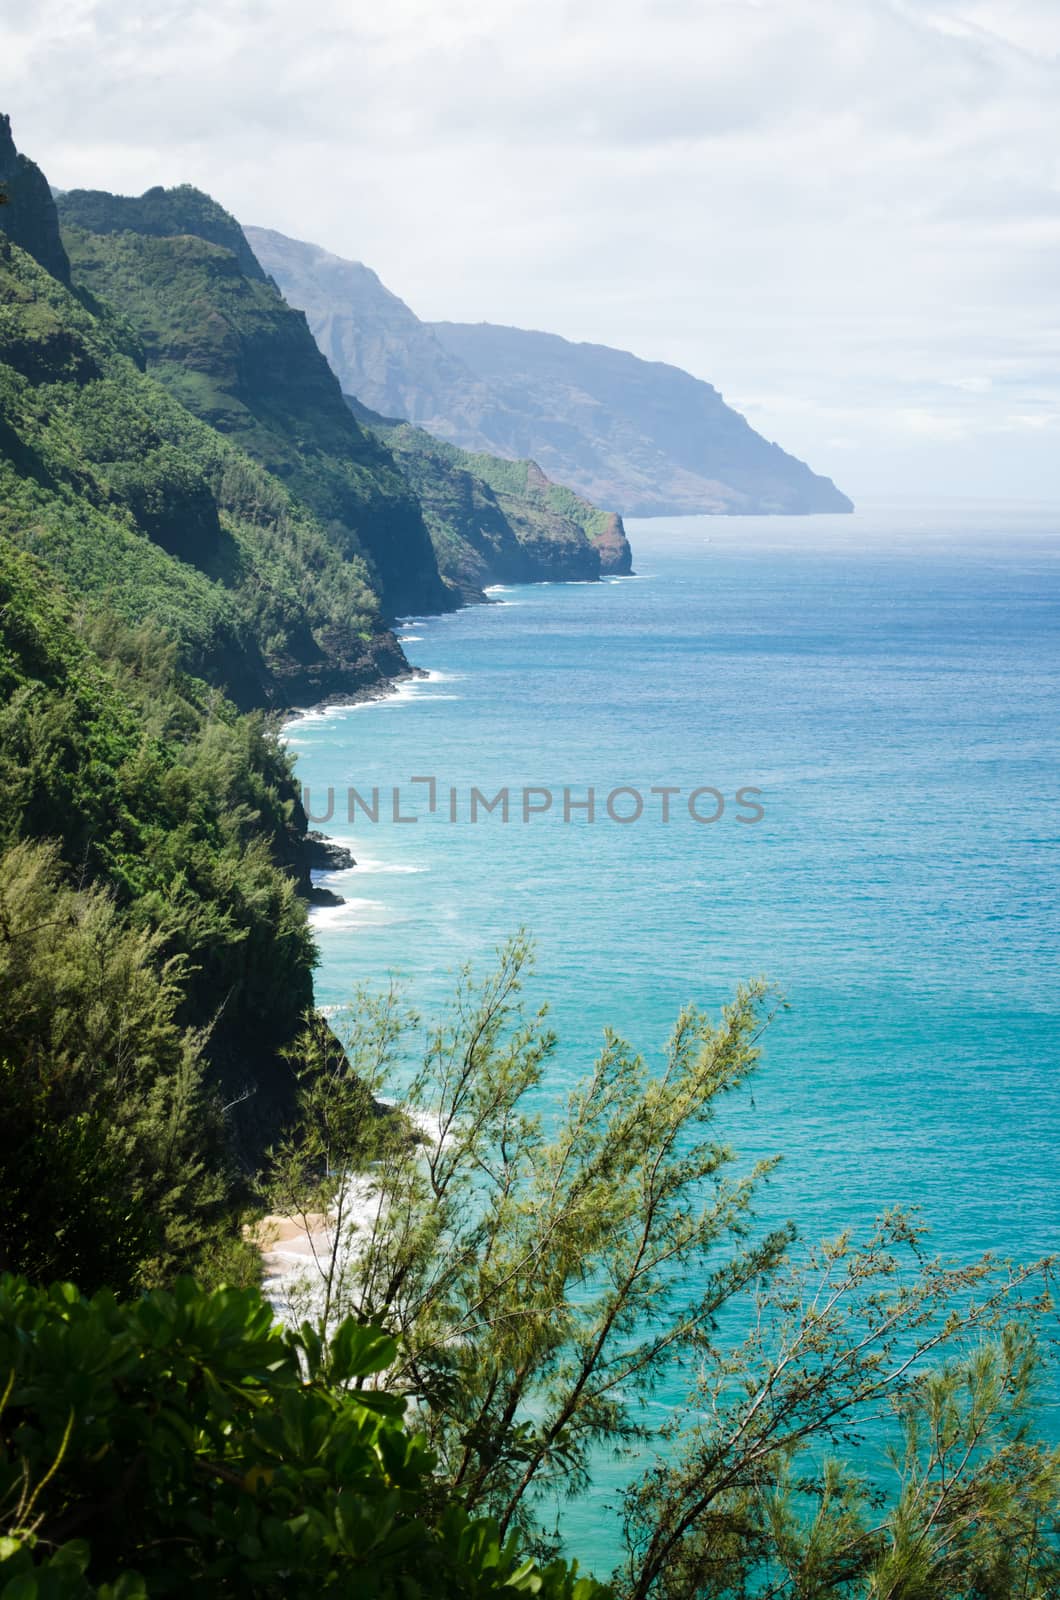 Abrupt mountains and shores seen from a view point in the Kalalau Trail in Kauai, Hawaii, US